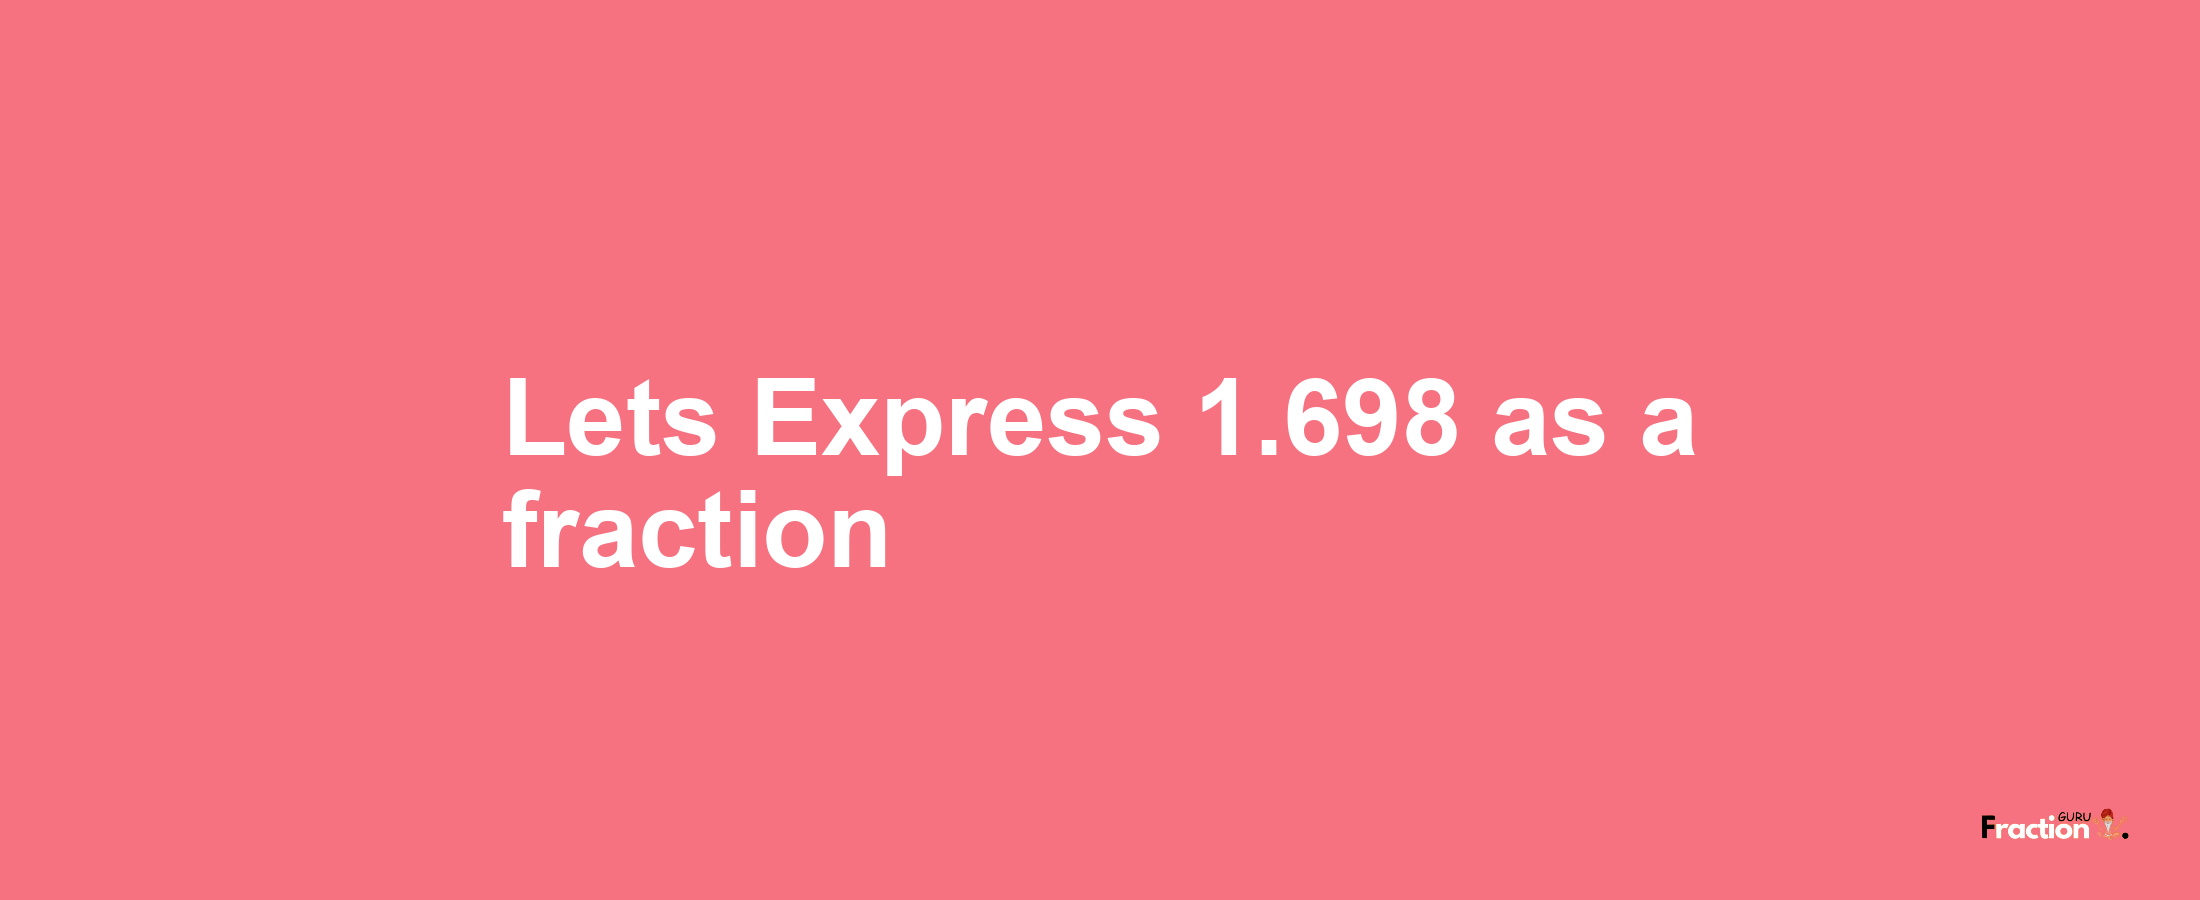 Lets Express 1.698 as afraction